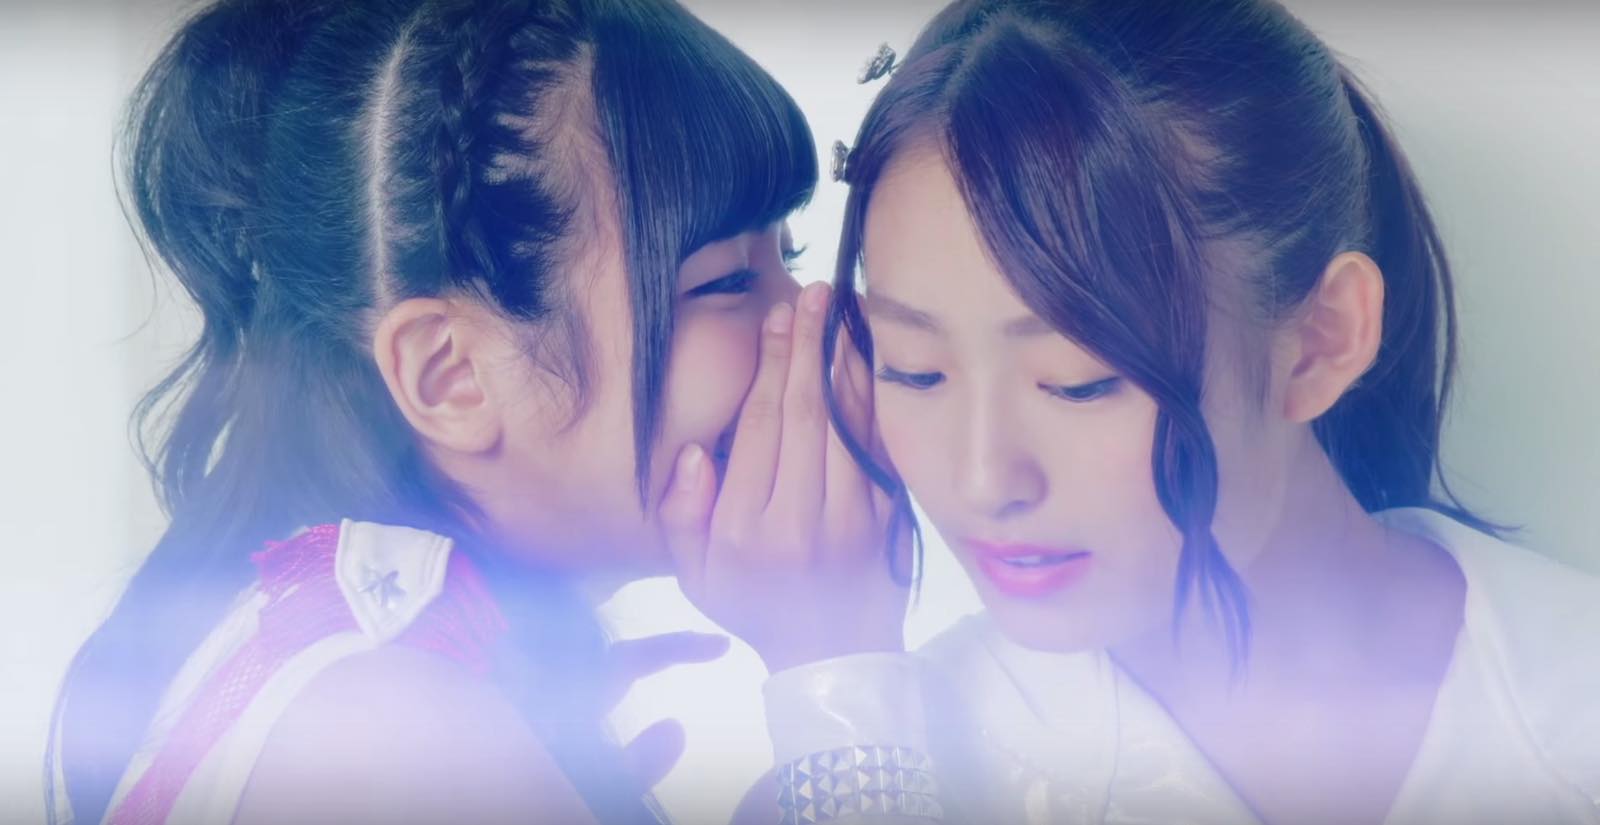 Did You Hear? GEM Revealed the MV for Their 4th Single “Baby, Love me!”